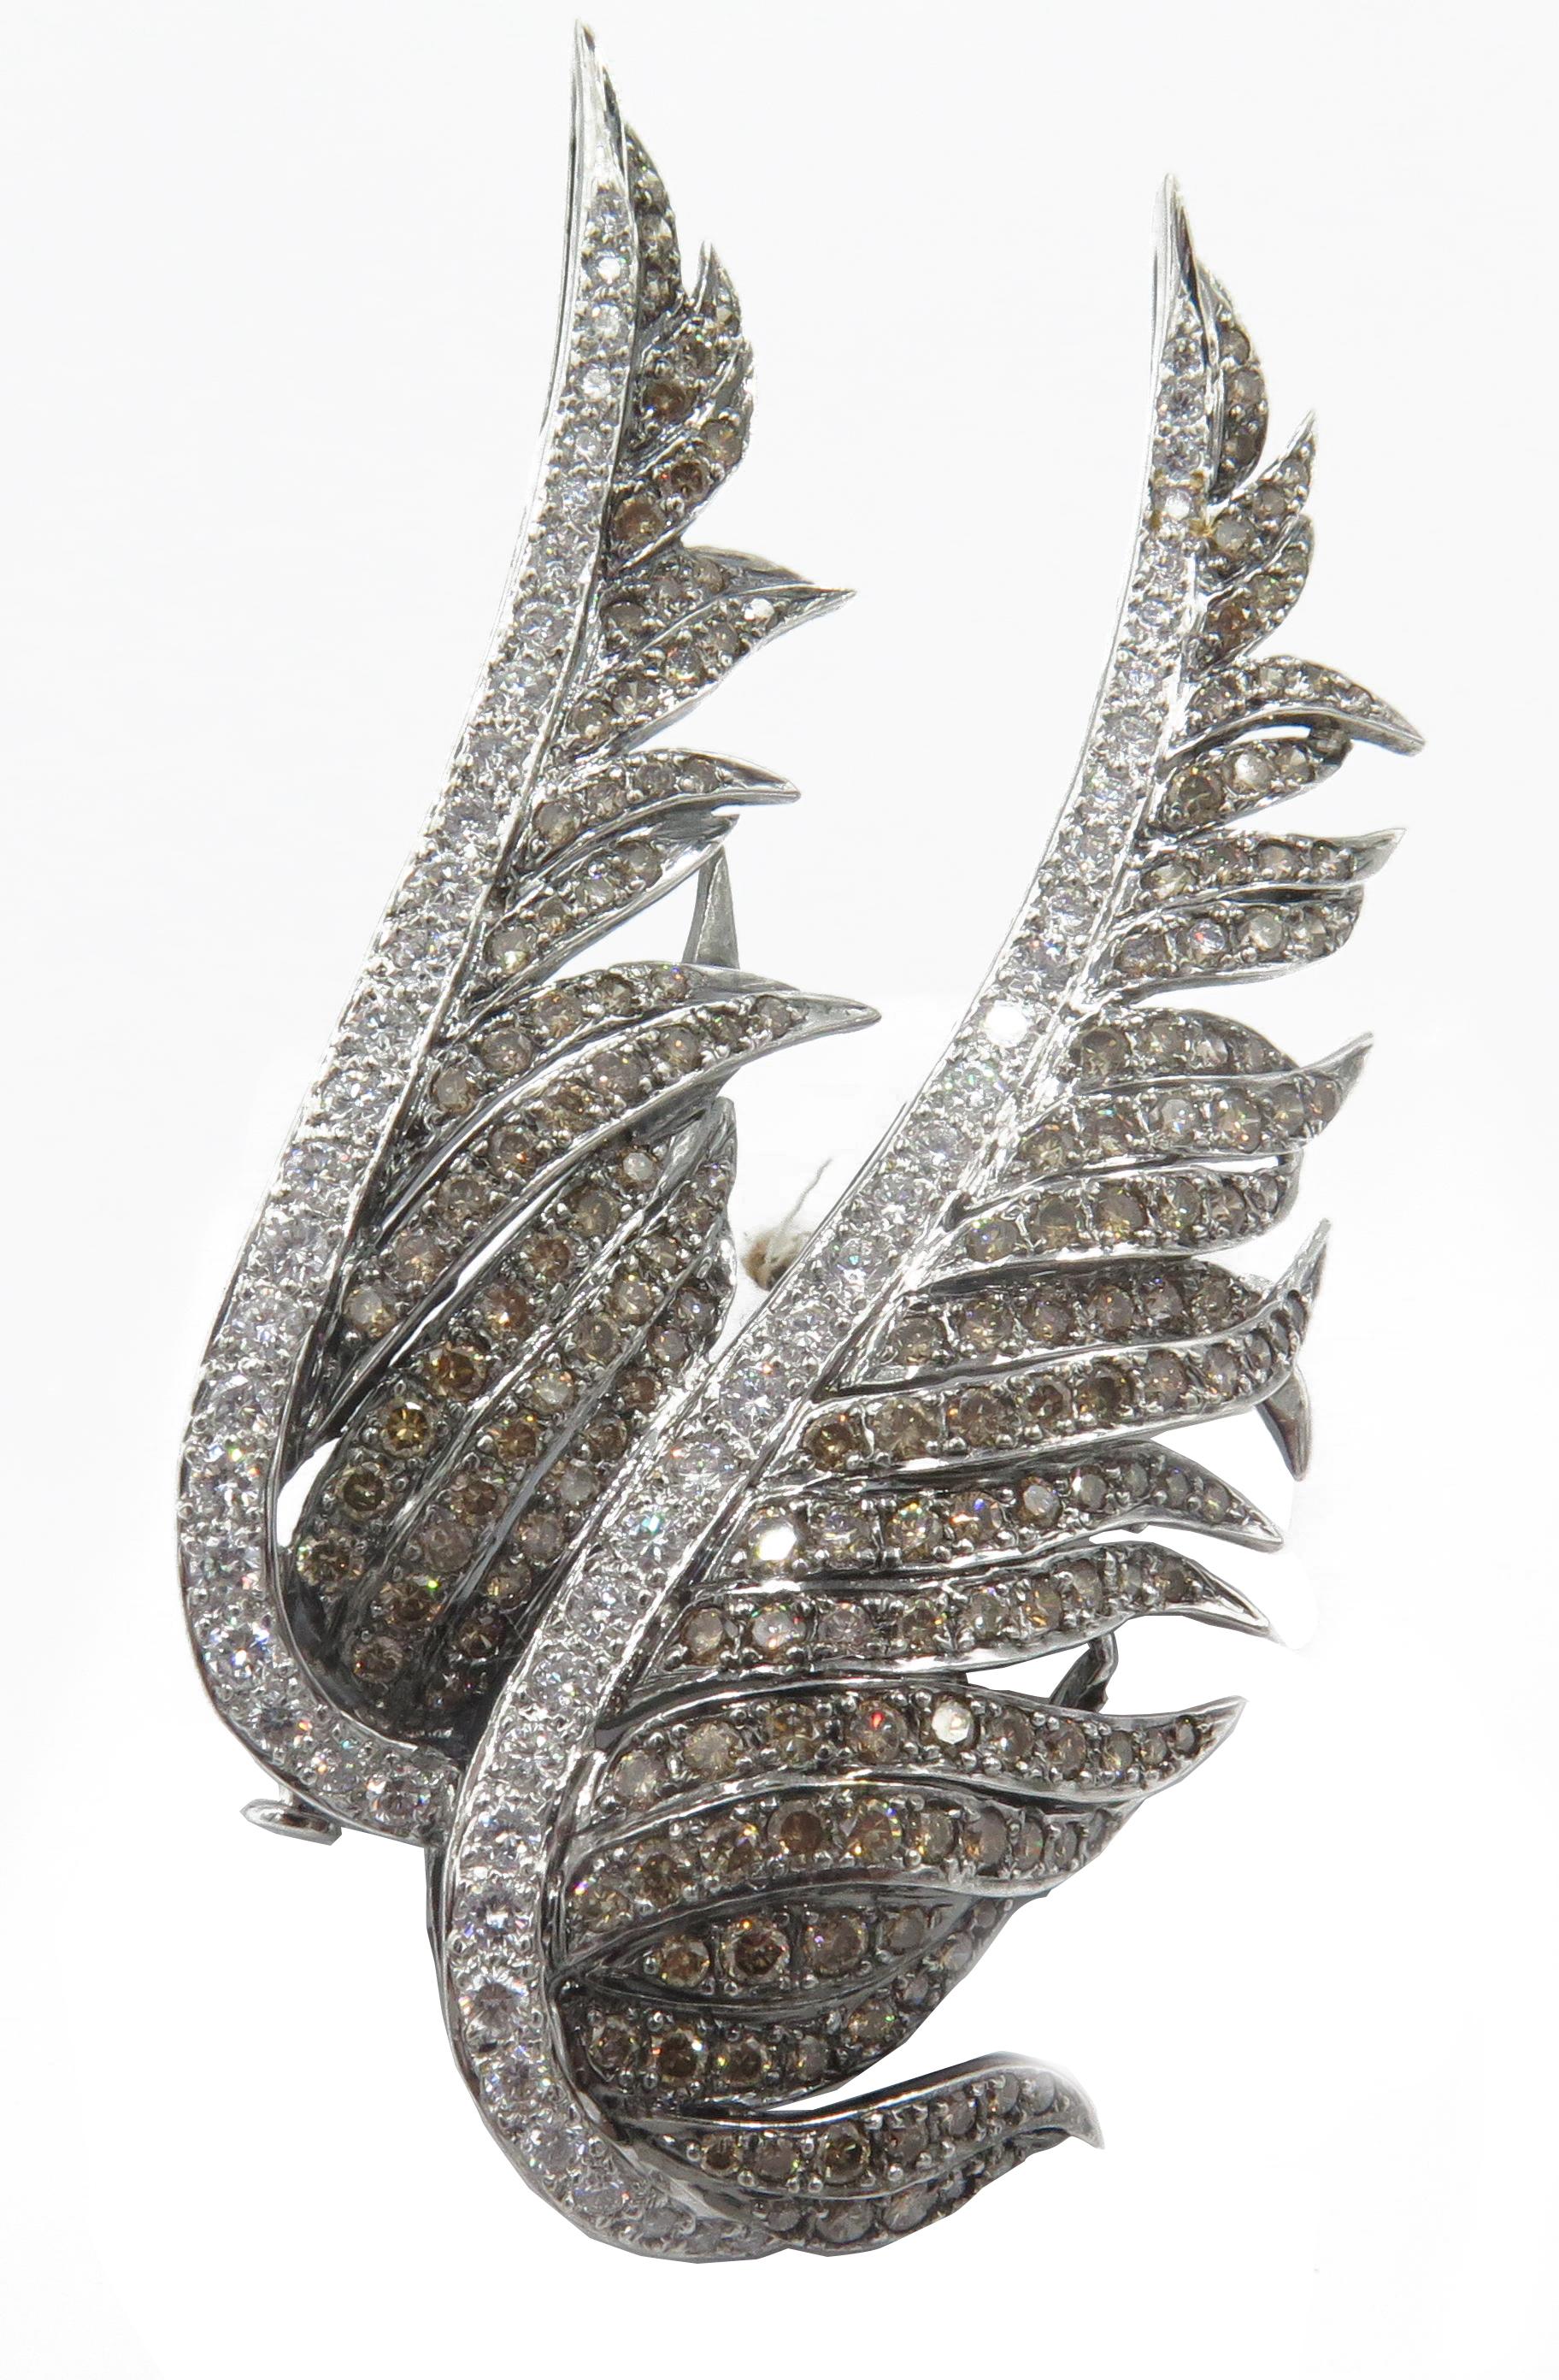 A beautifully crafted pair of 18k white gold wings encrusted with diamonds are the  focus of this exquisite brooch. A row of round white brilliant diamonds outline the front of each wing, creating the graceful curves. The detailed feathery part of